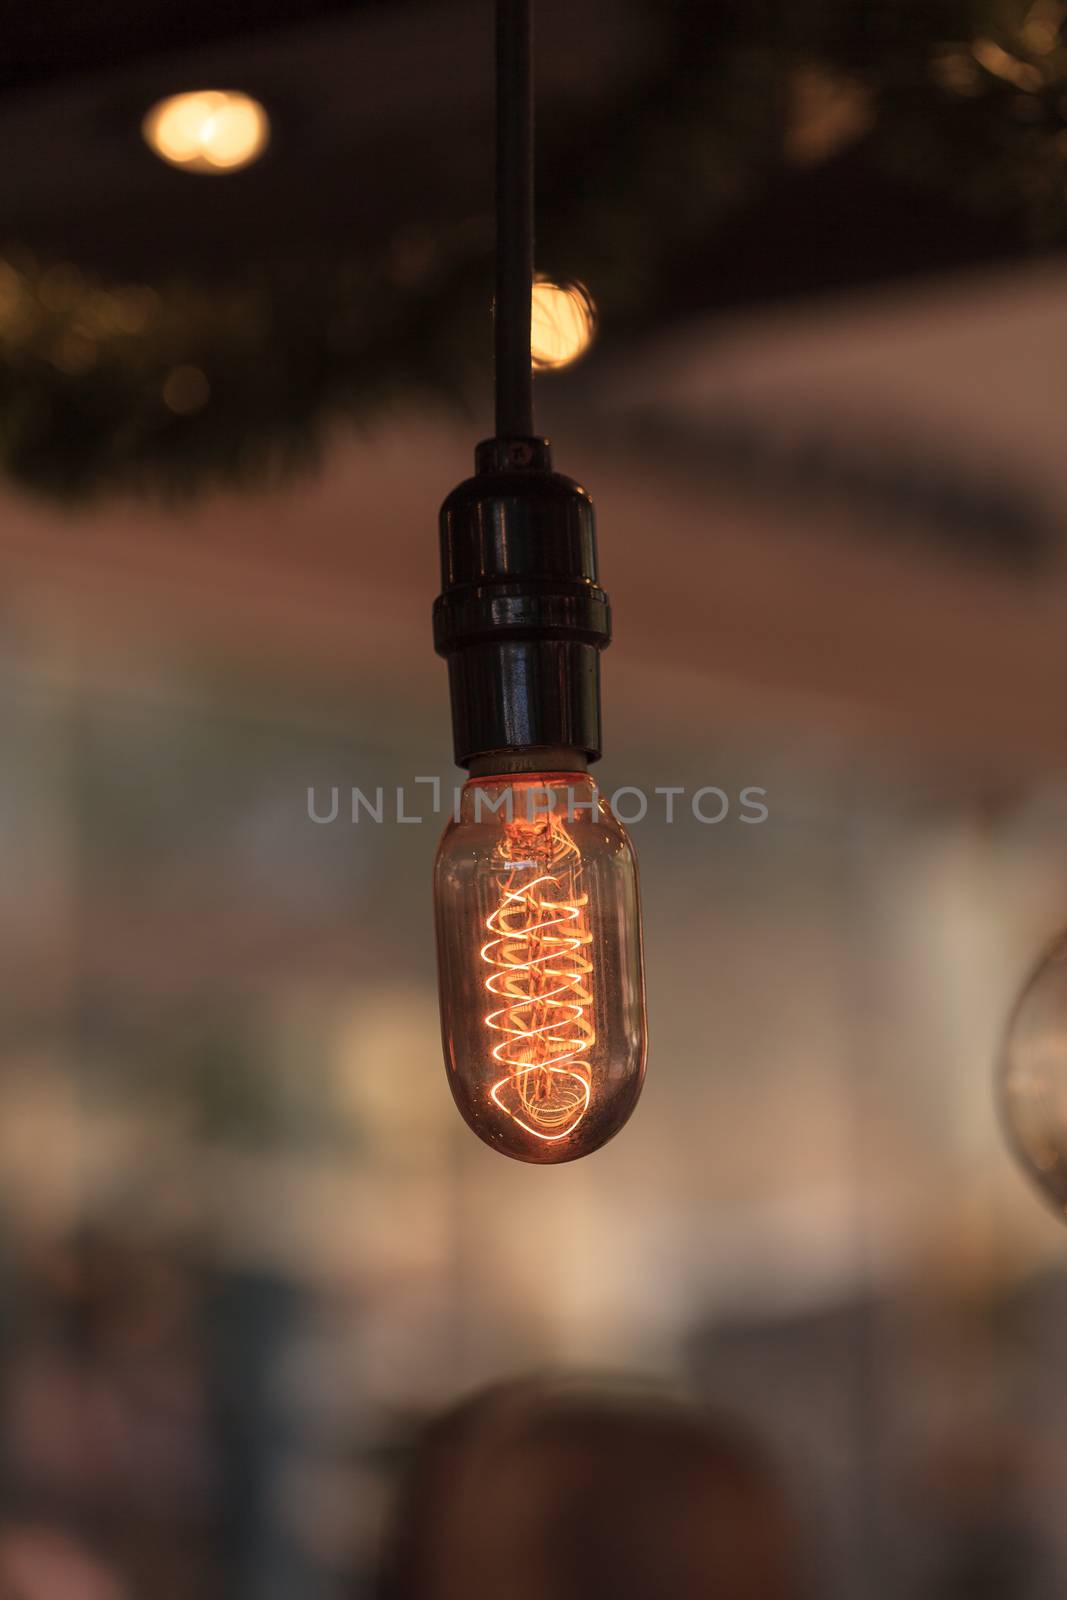 Ornamental light bulb lit up and hanging from the ceiling with a modern kitchen in the background, representing a rustic concept of success.